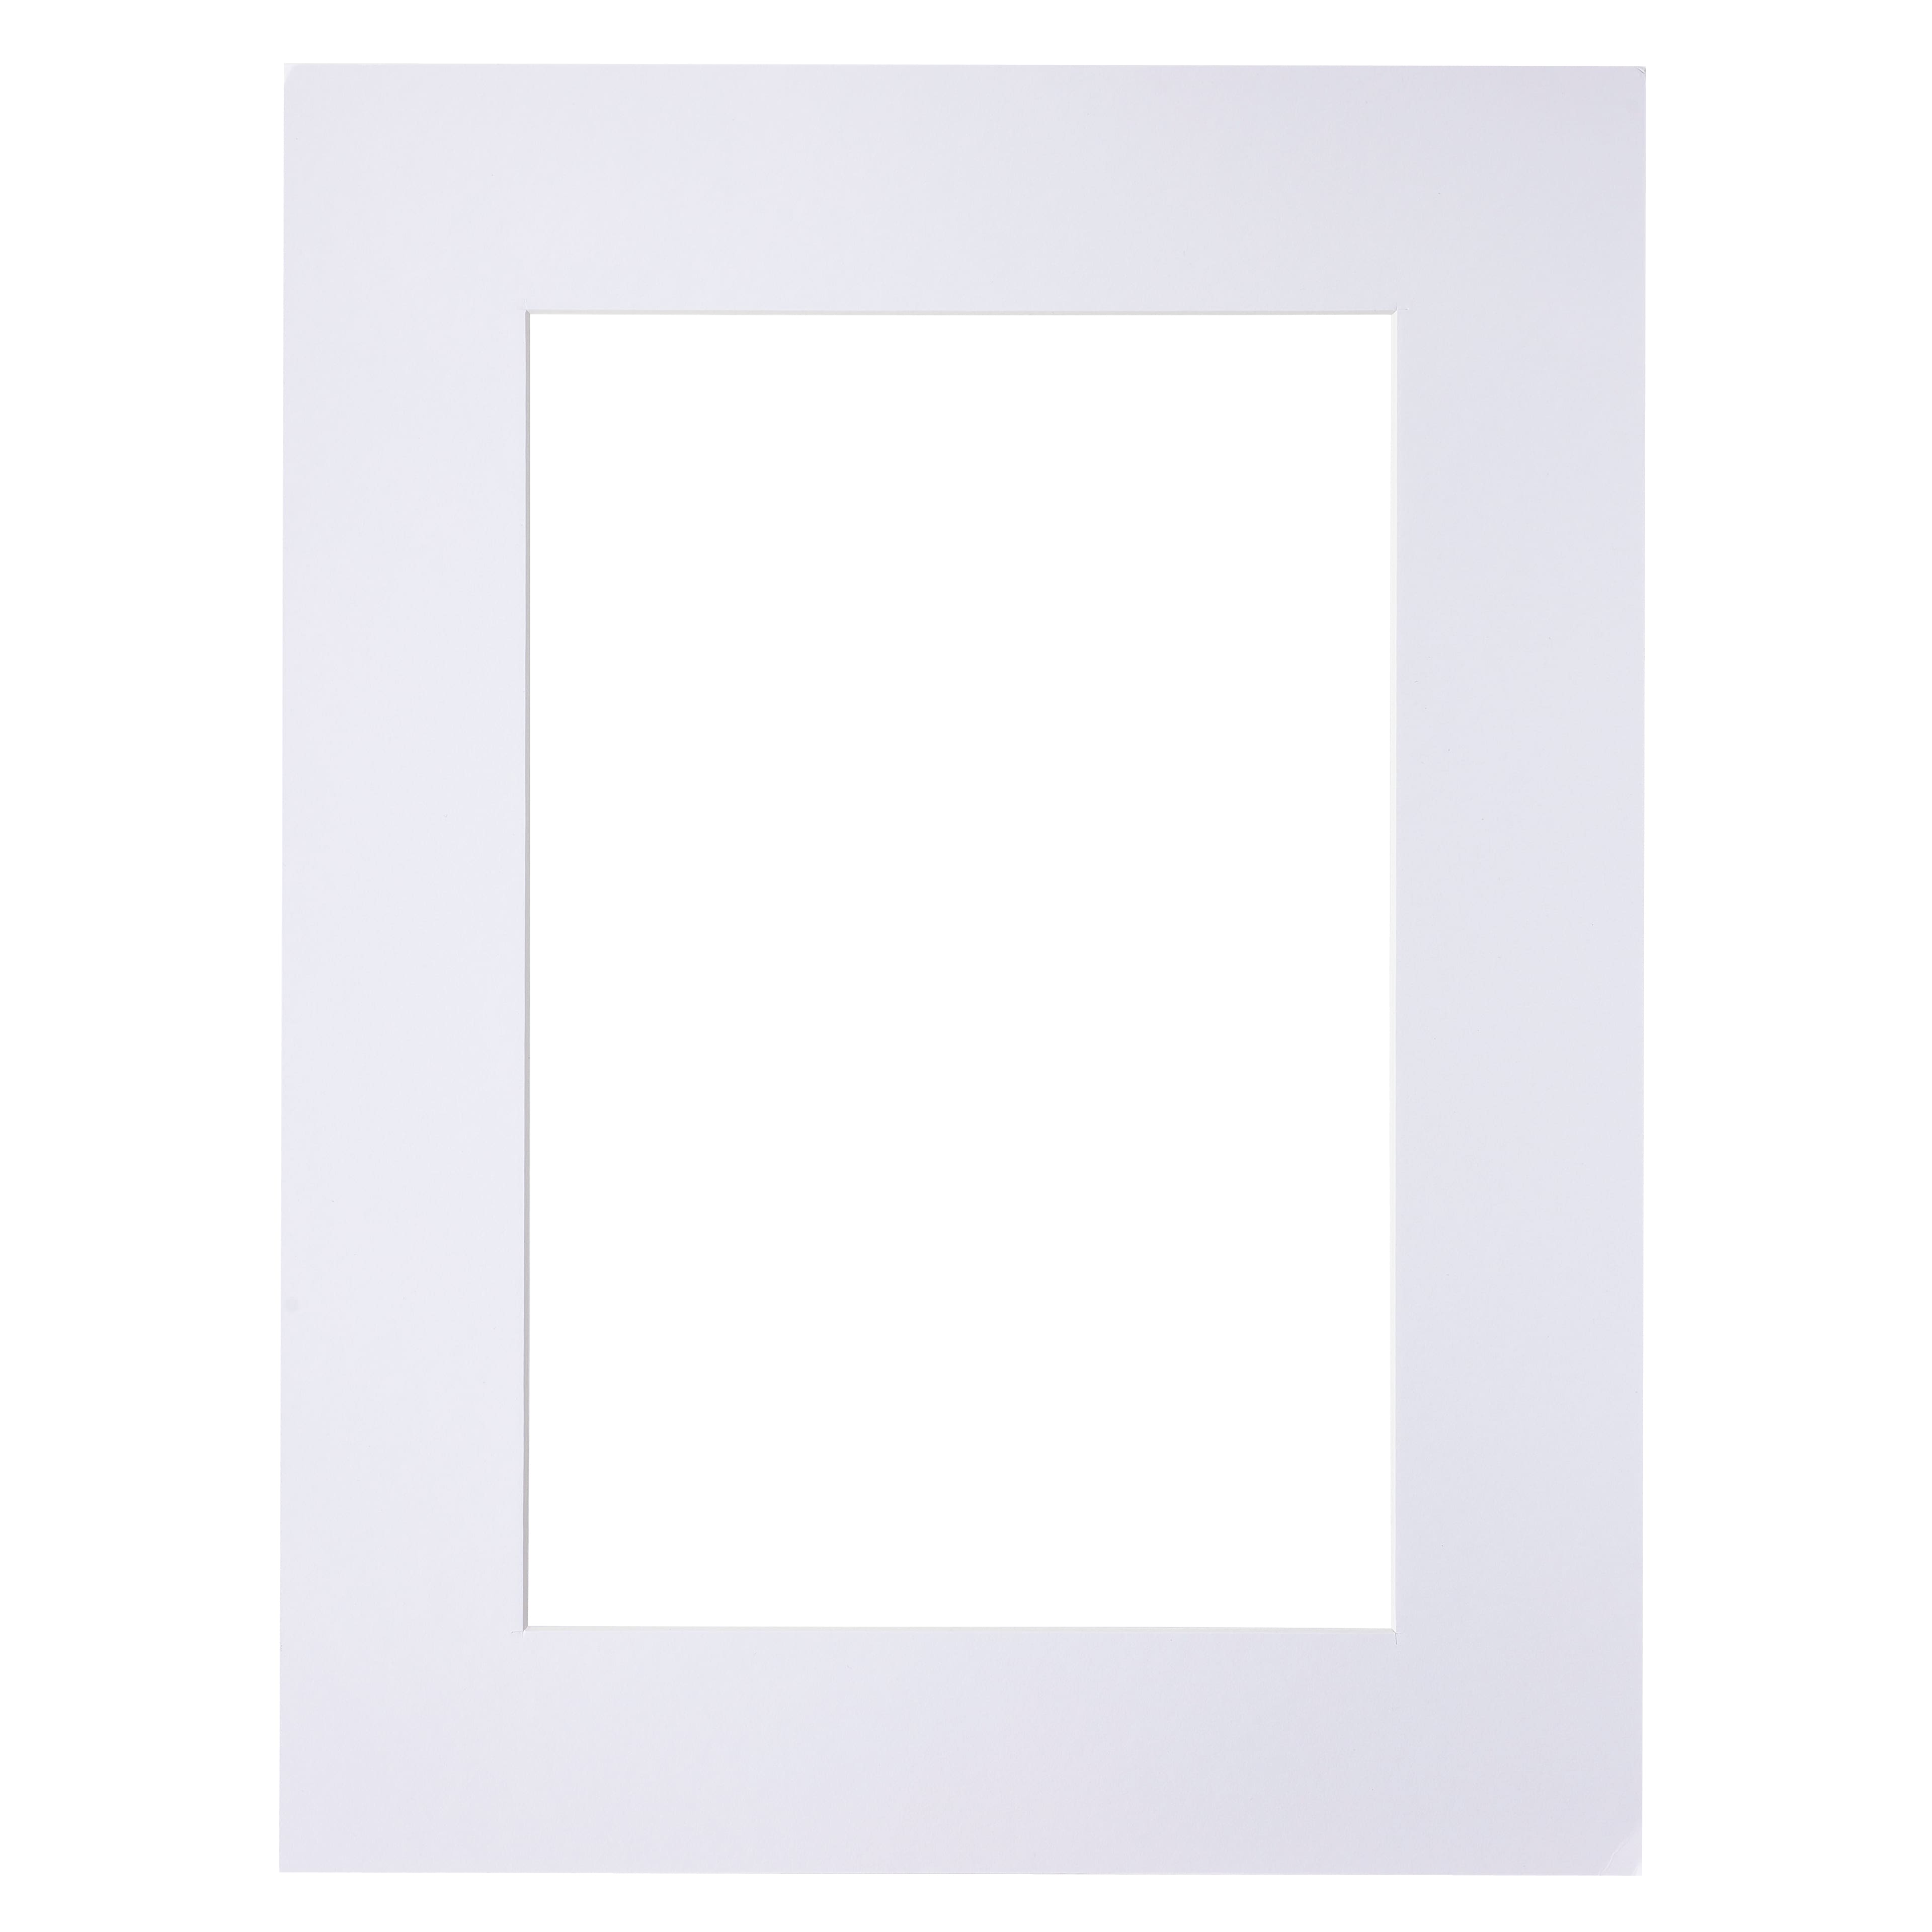 18x24 Mat for 12x18 Photo - Soft Yellow Matboard for Frames Measuring 18 x 24 Inches - to Display Art Measuring 12 x 18 Inches